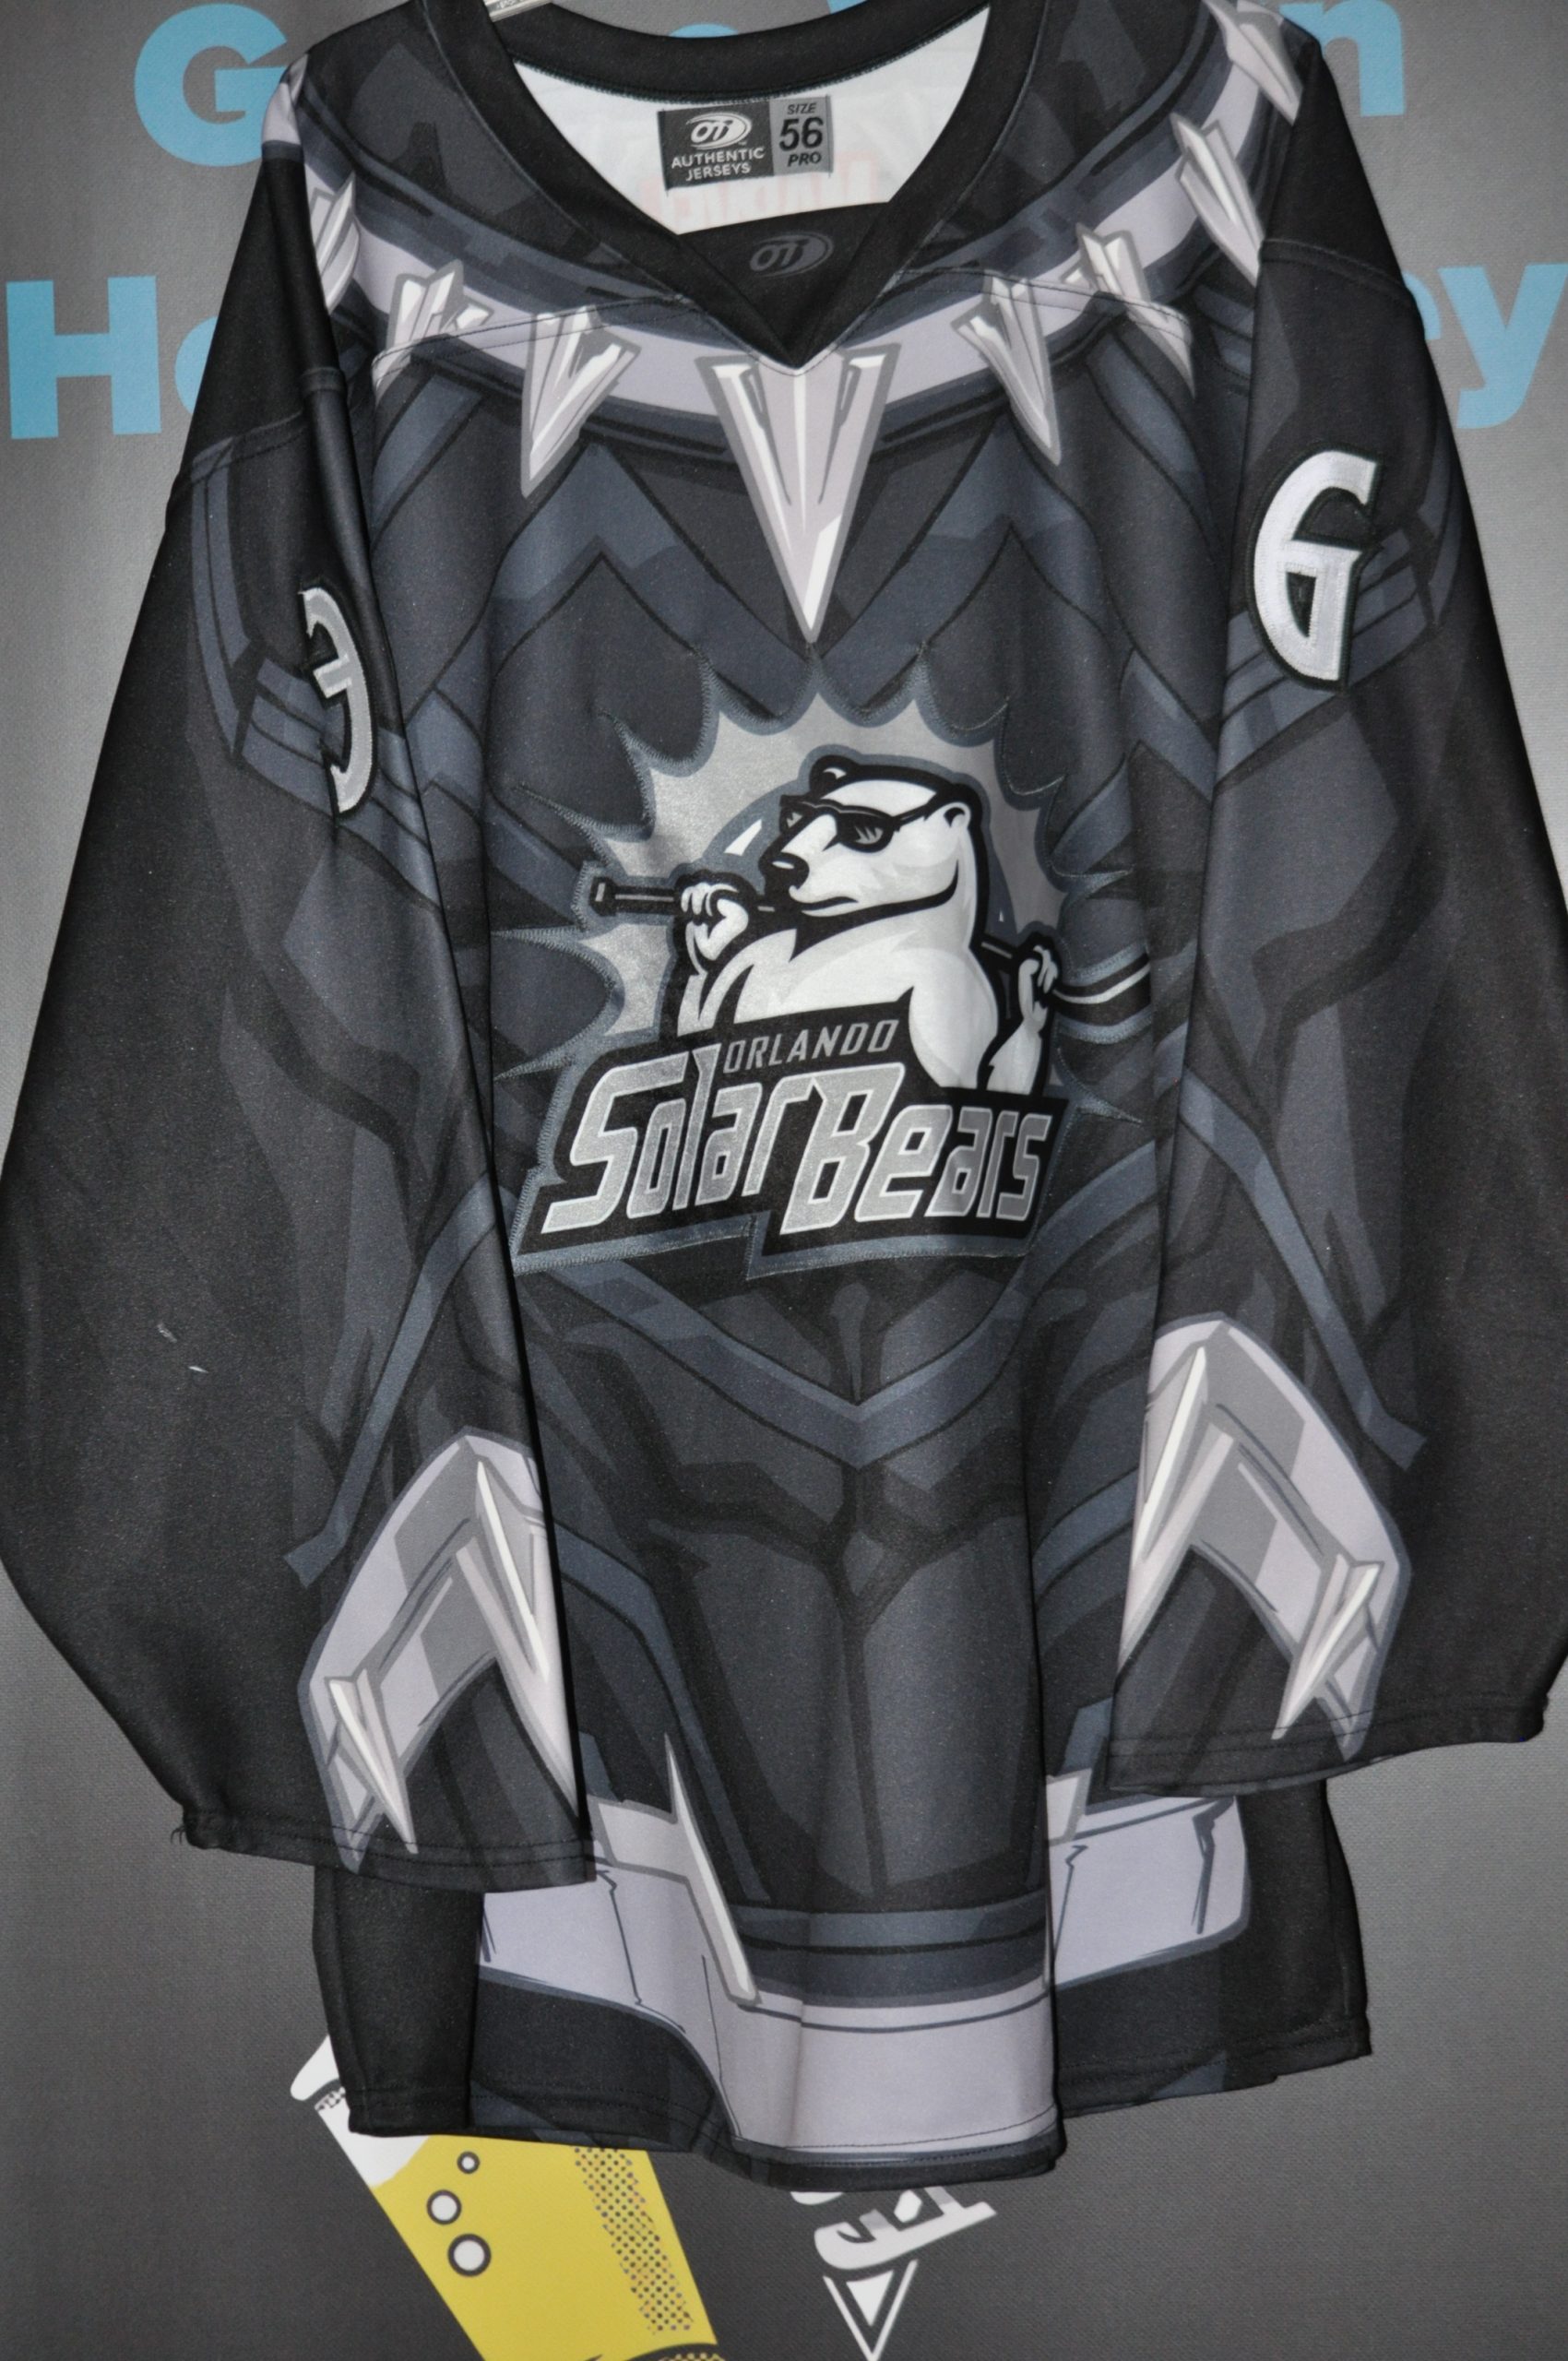 Solar Bears to auction jerseys to benefit ECHL players beginning May 6